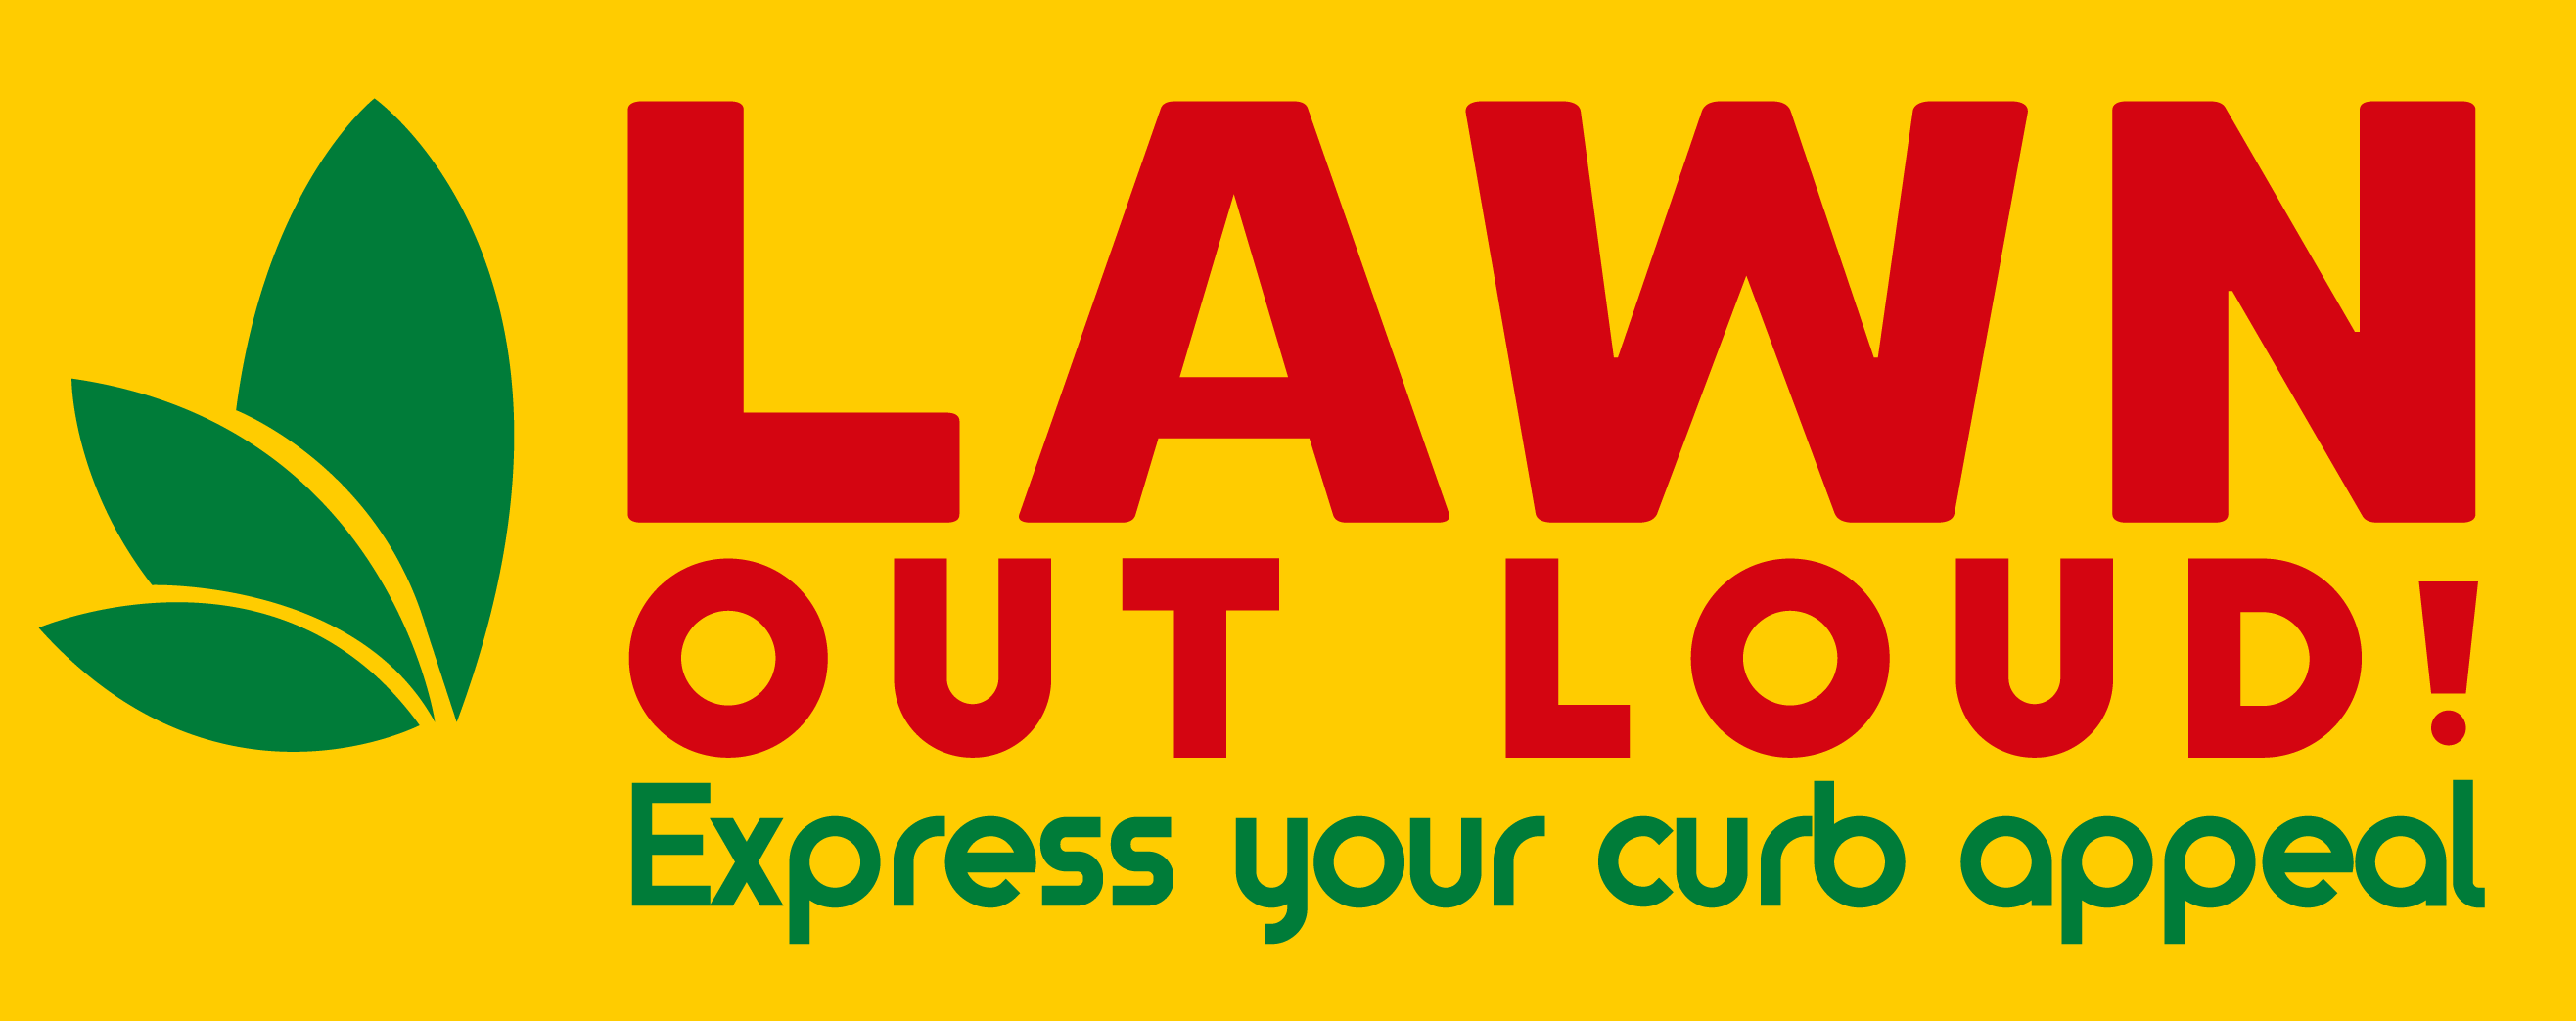 Lawn Out Loud - Professional Lawn Care and Landscaping Services in South Florida, Fort Lauderdale